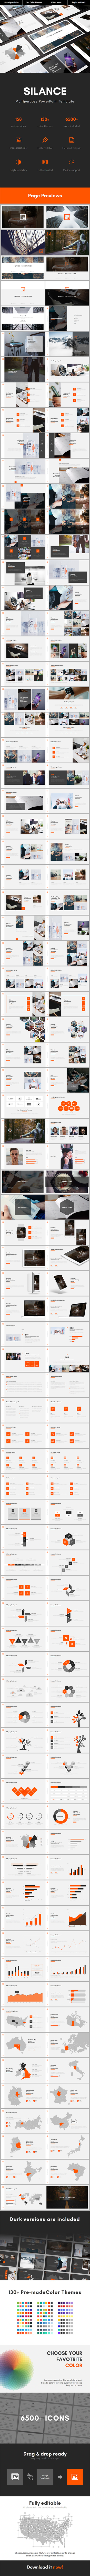 Silance Multipurpose PowerPoint Template